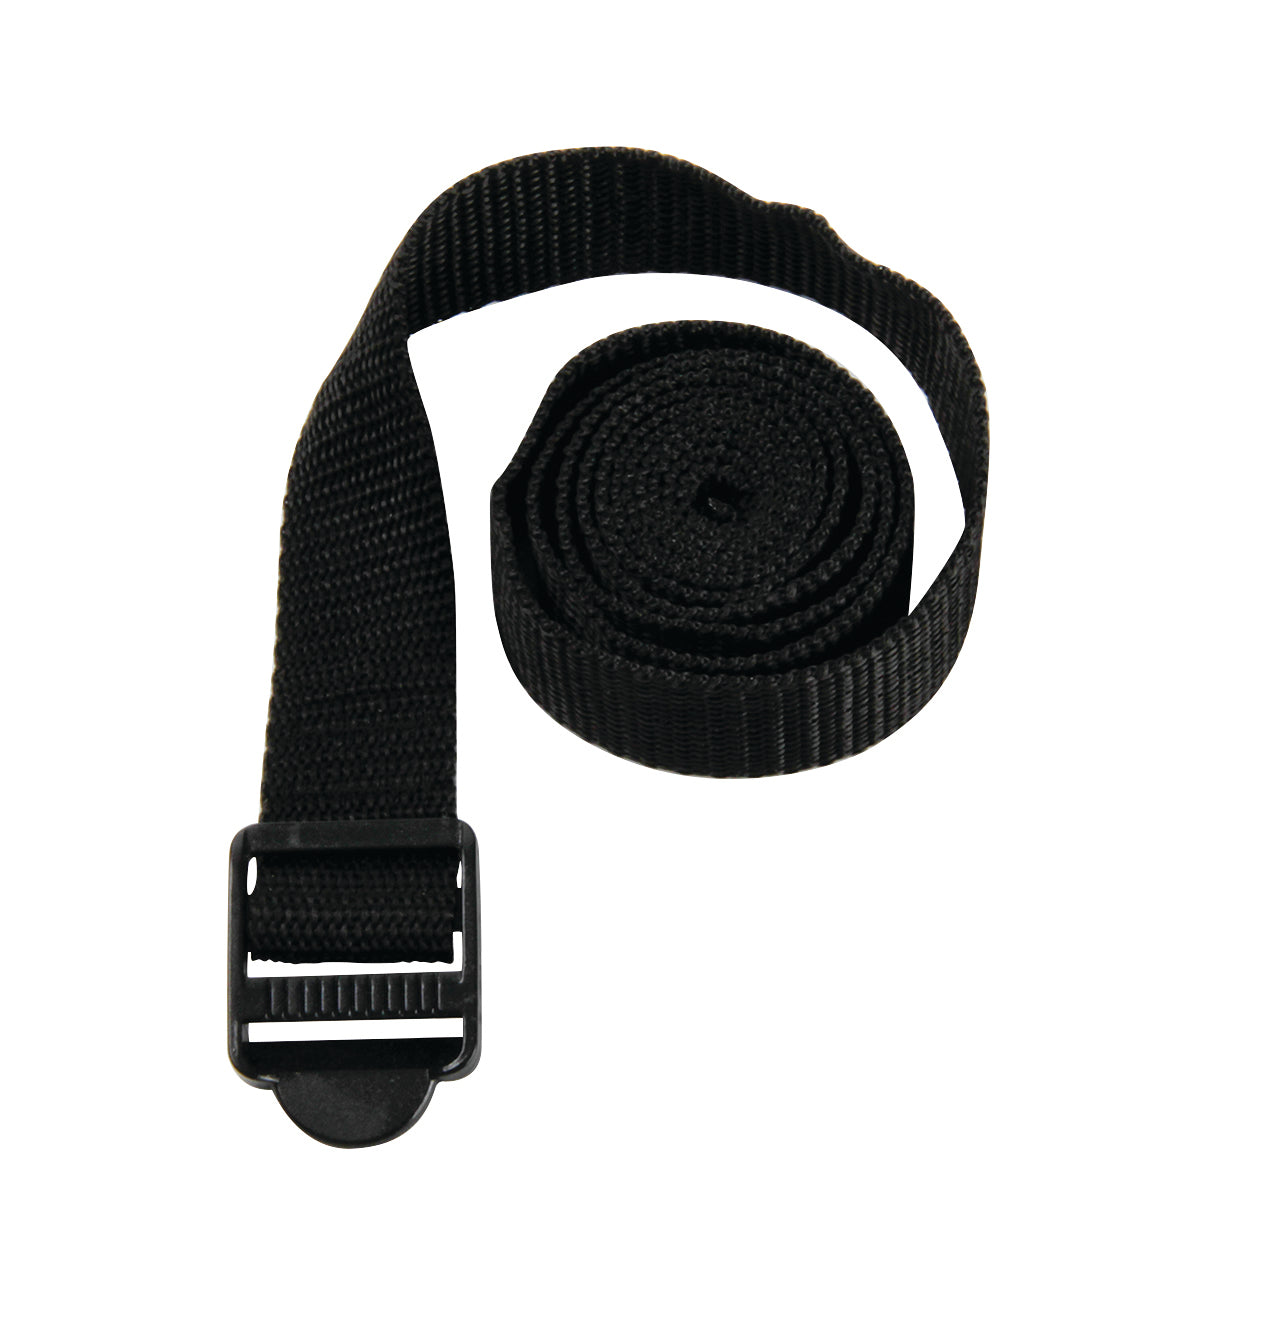 Camco 51066 Utility Webbing Strap with Buckle - 4'